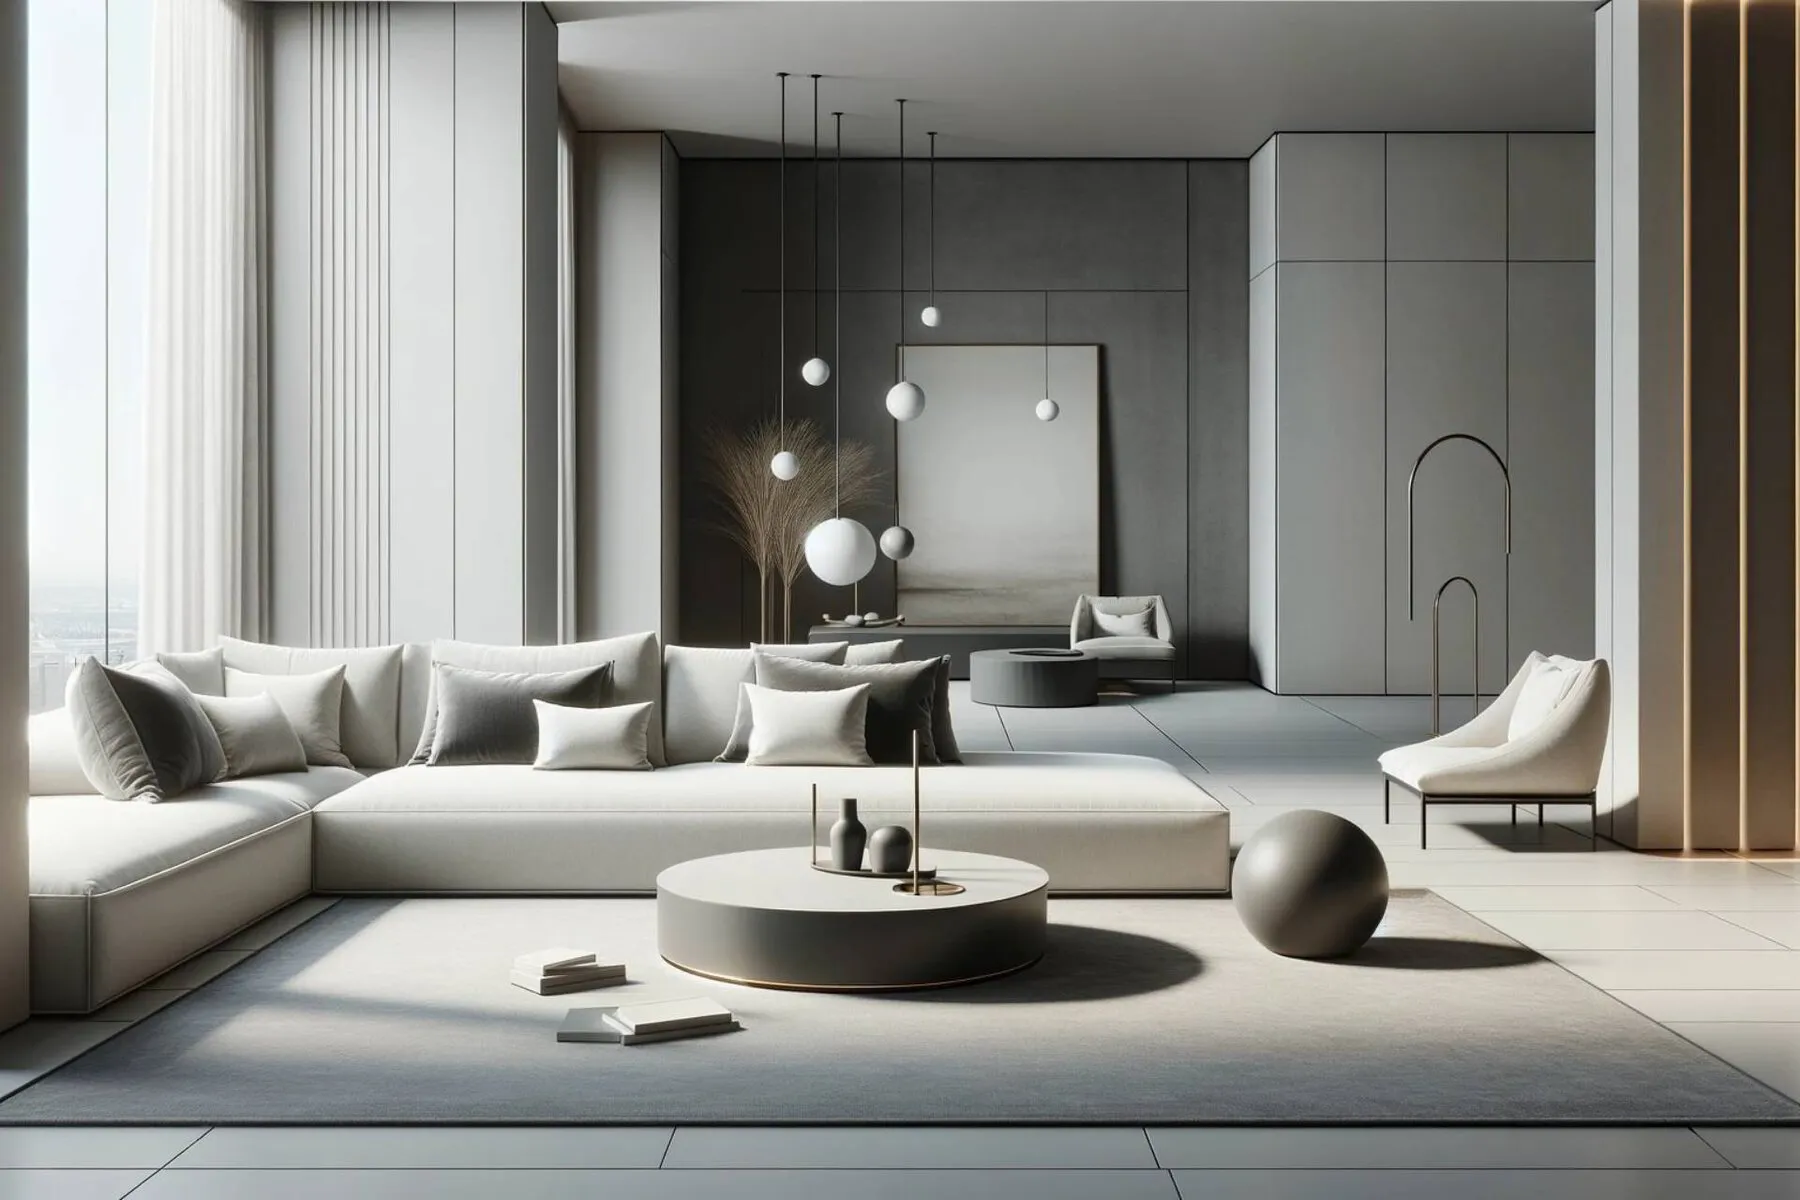 A minimalist luxury interior design room with high-quality, large furniture pieces